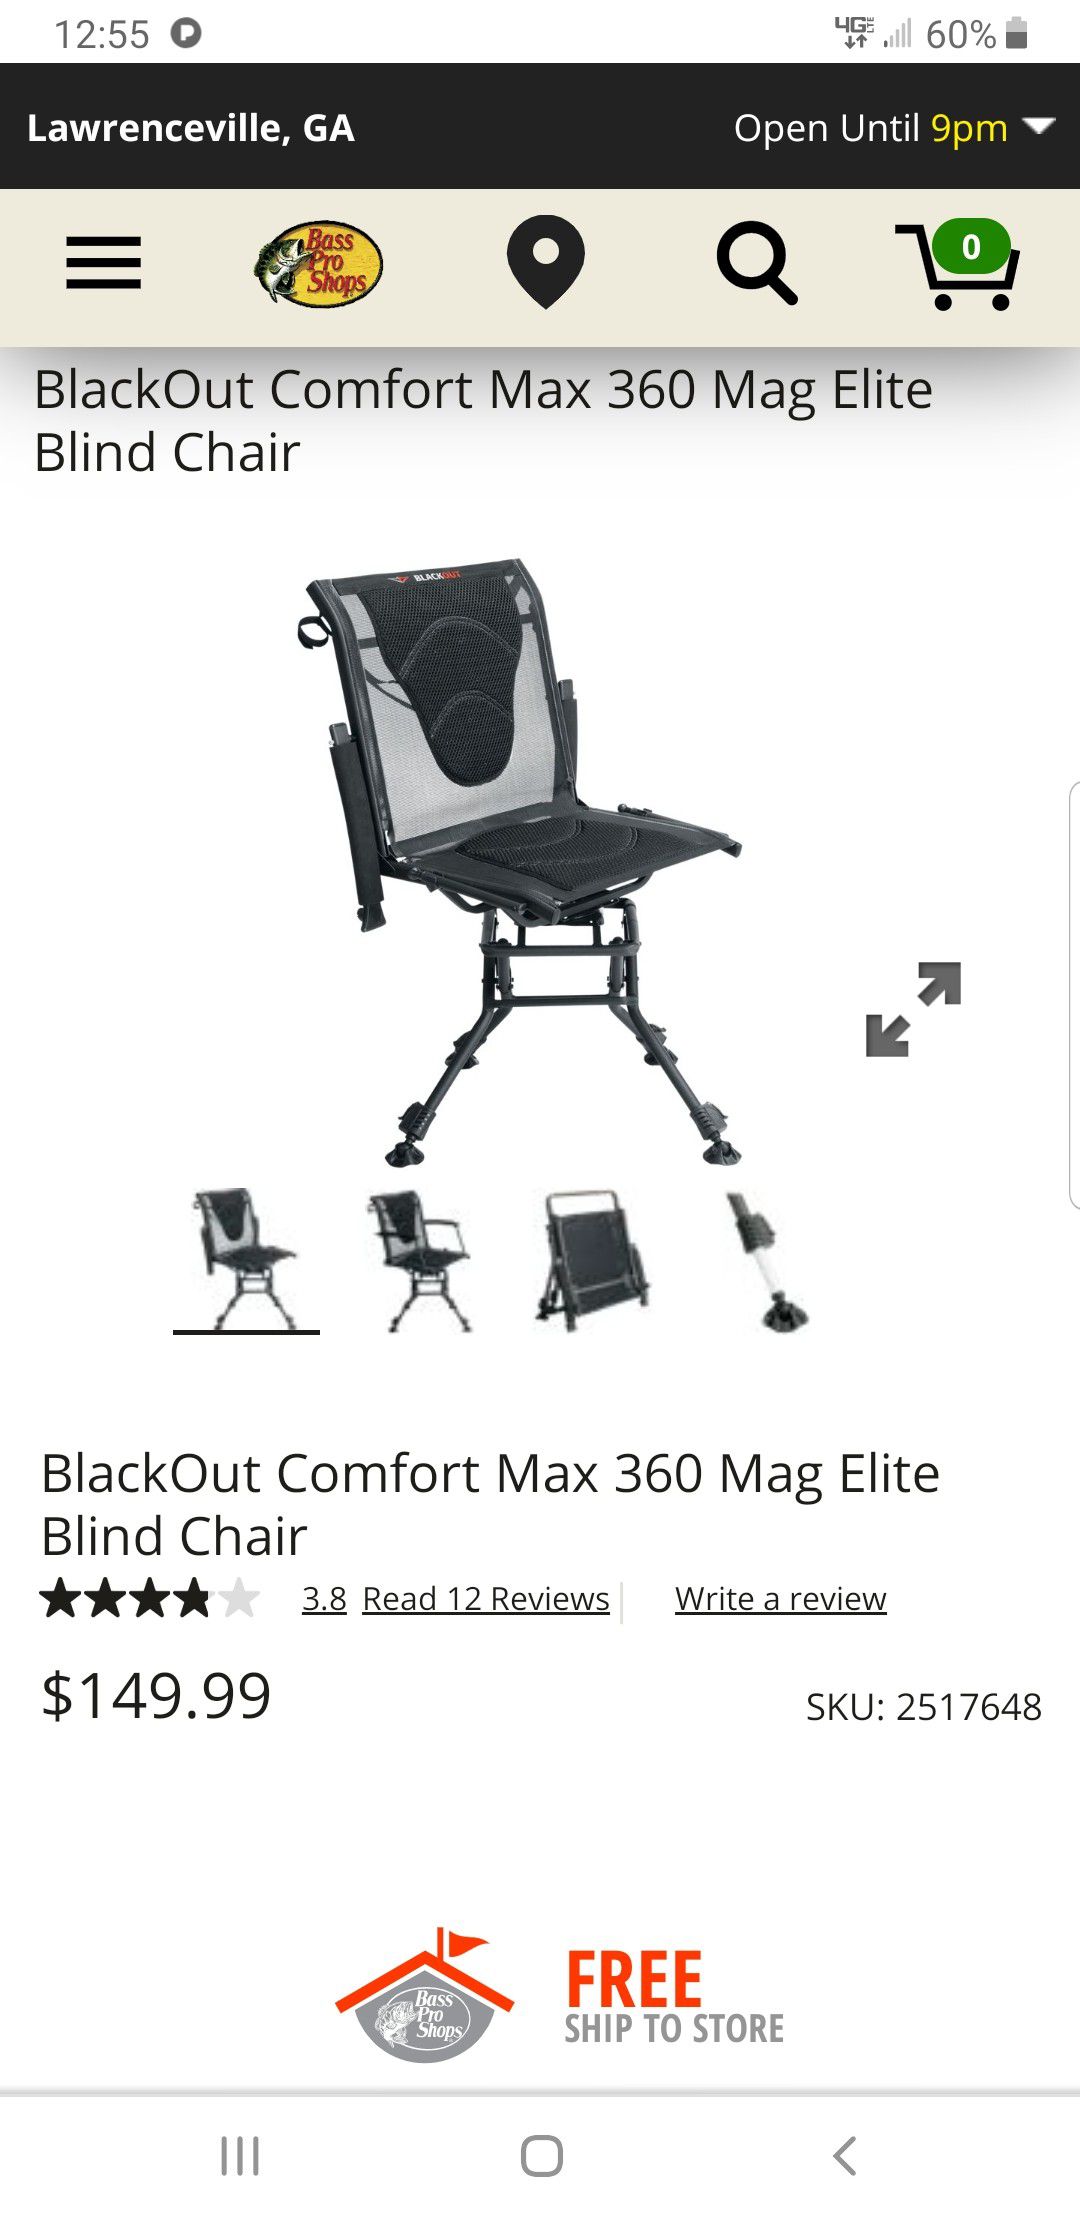 Brand new blackout blind chair